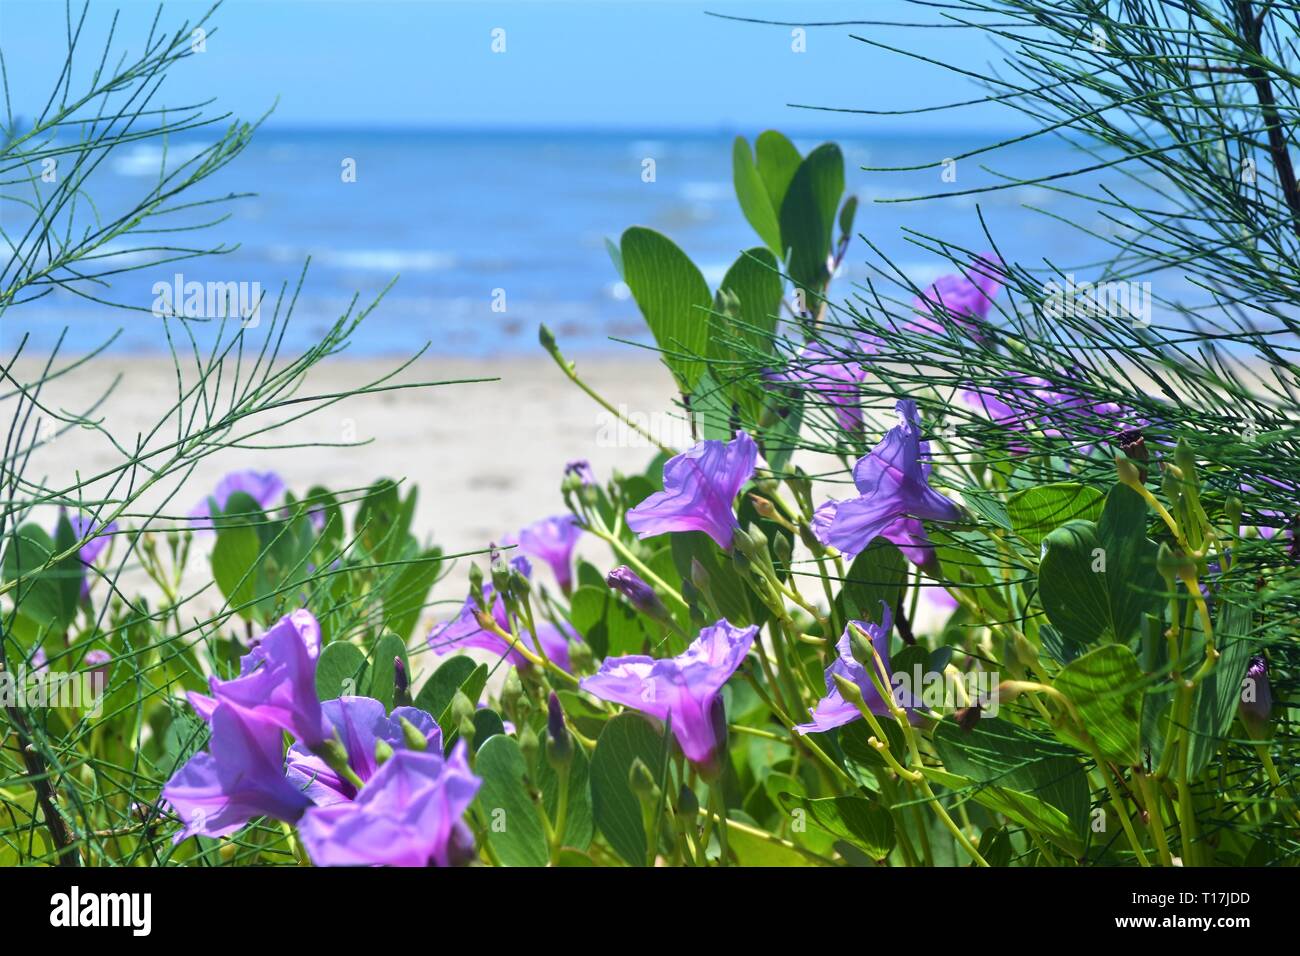 Morning glory with blue sea background. Stock Photo